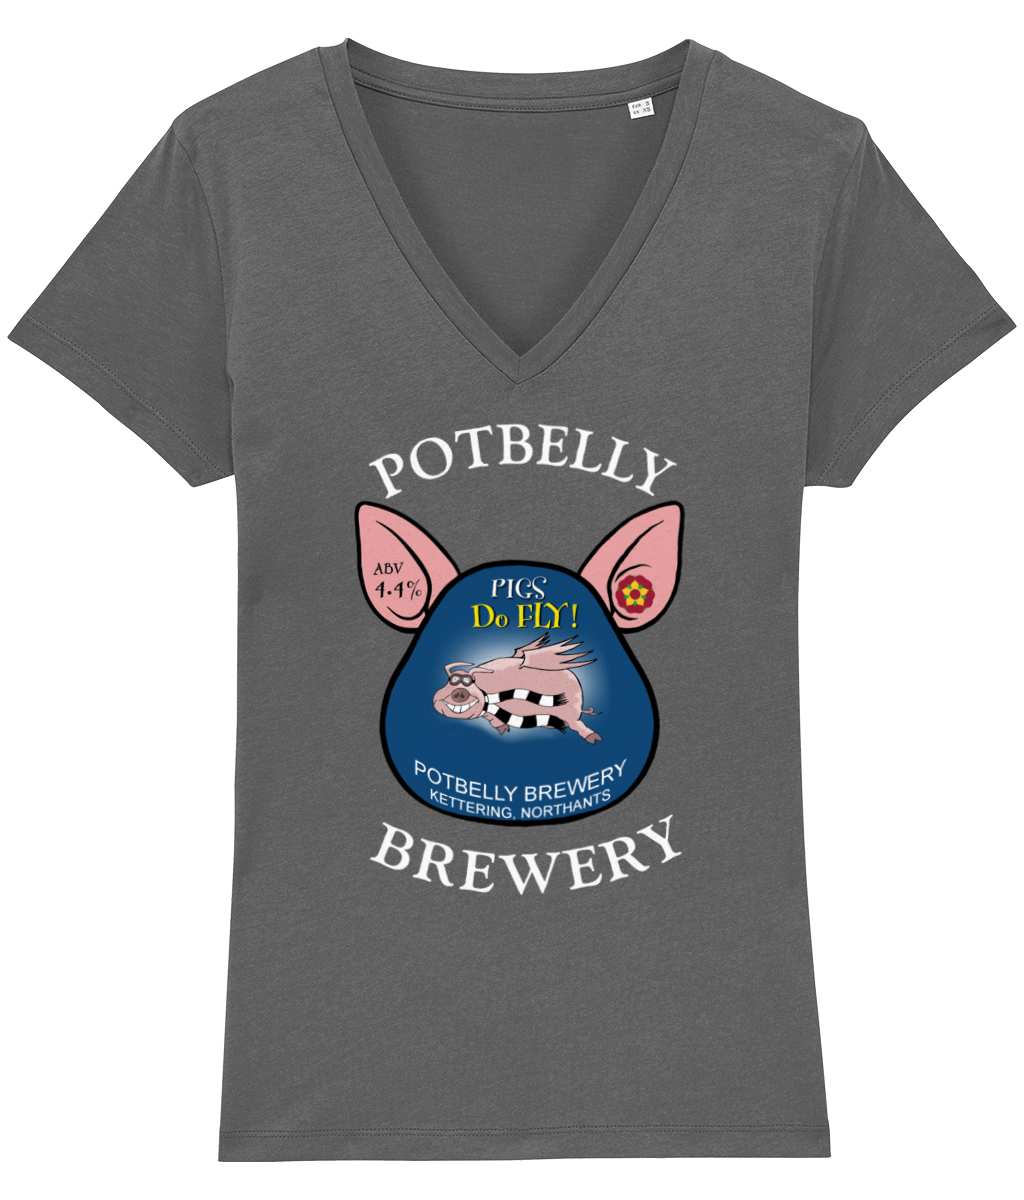 Ladies Cotton Potbelly Brewery Pigs Do Fly V-Neck T-Shirt